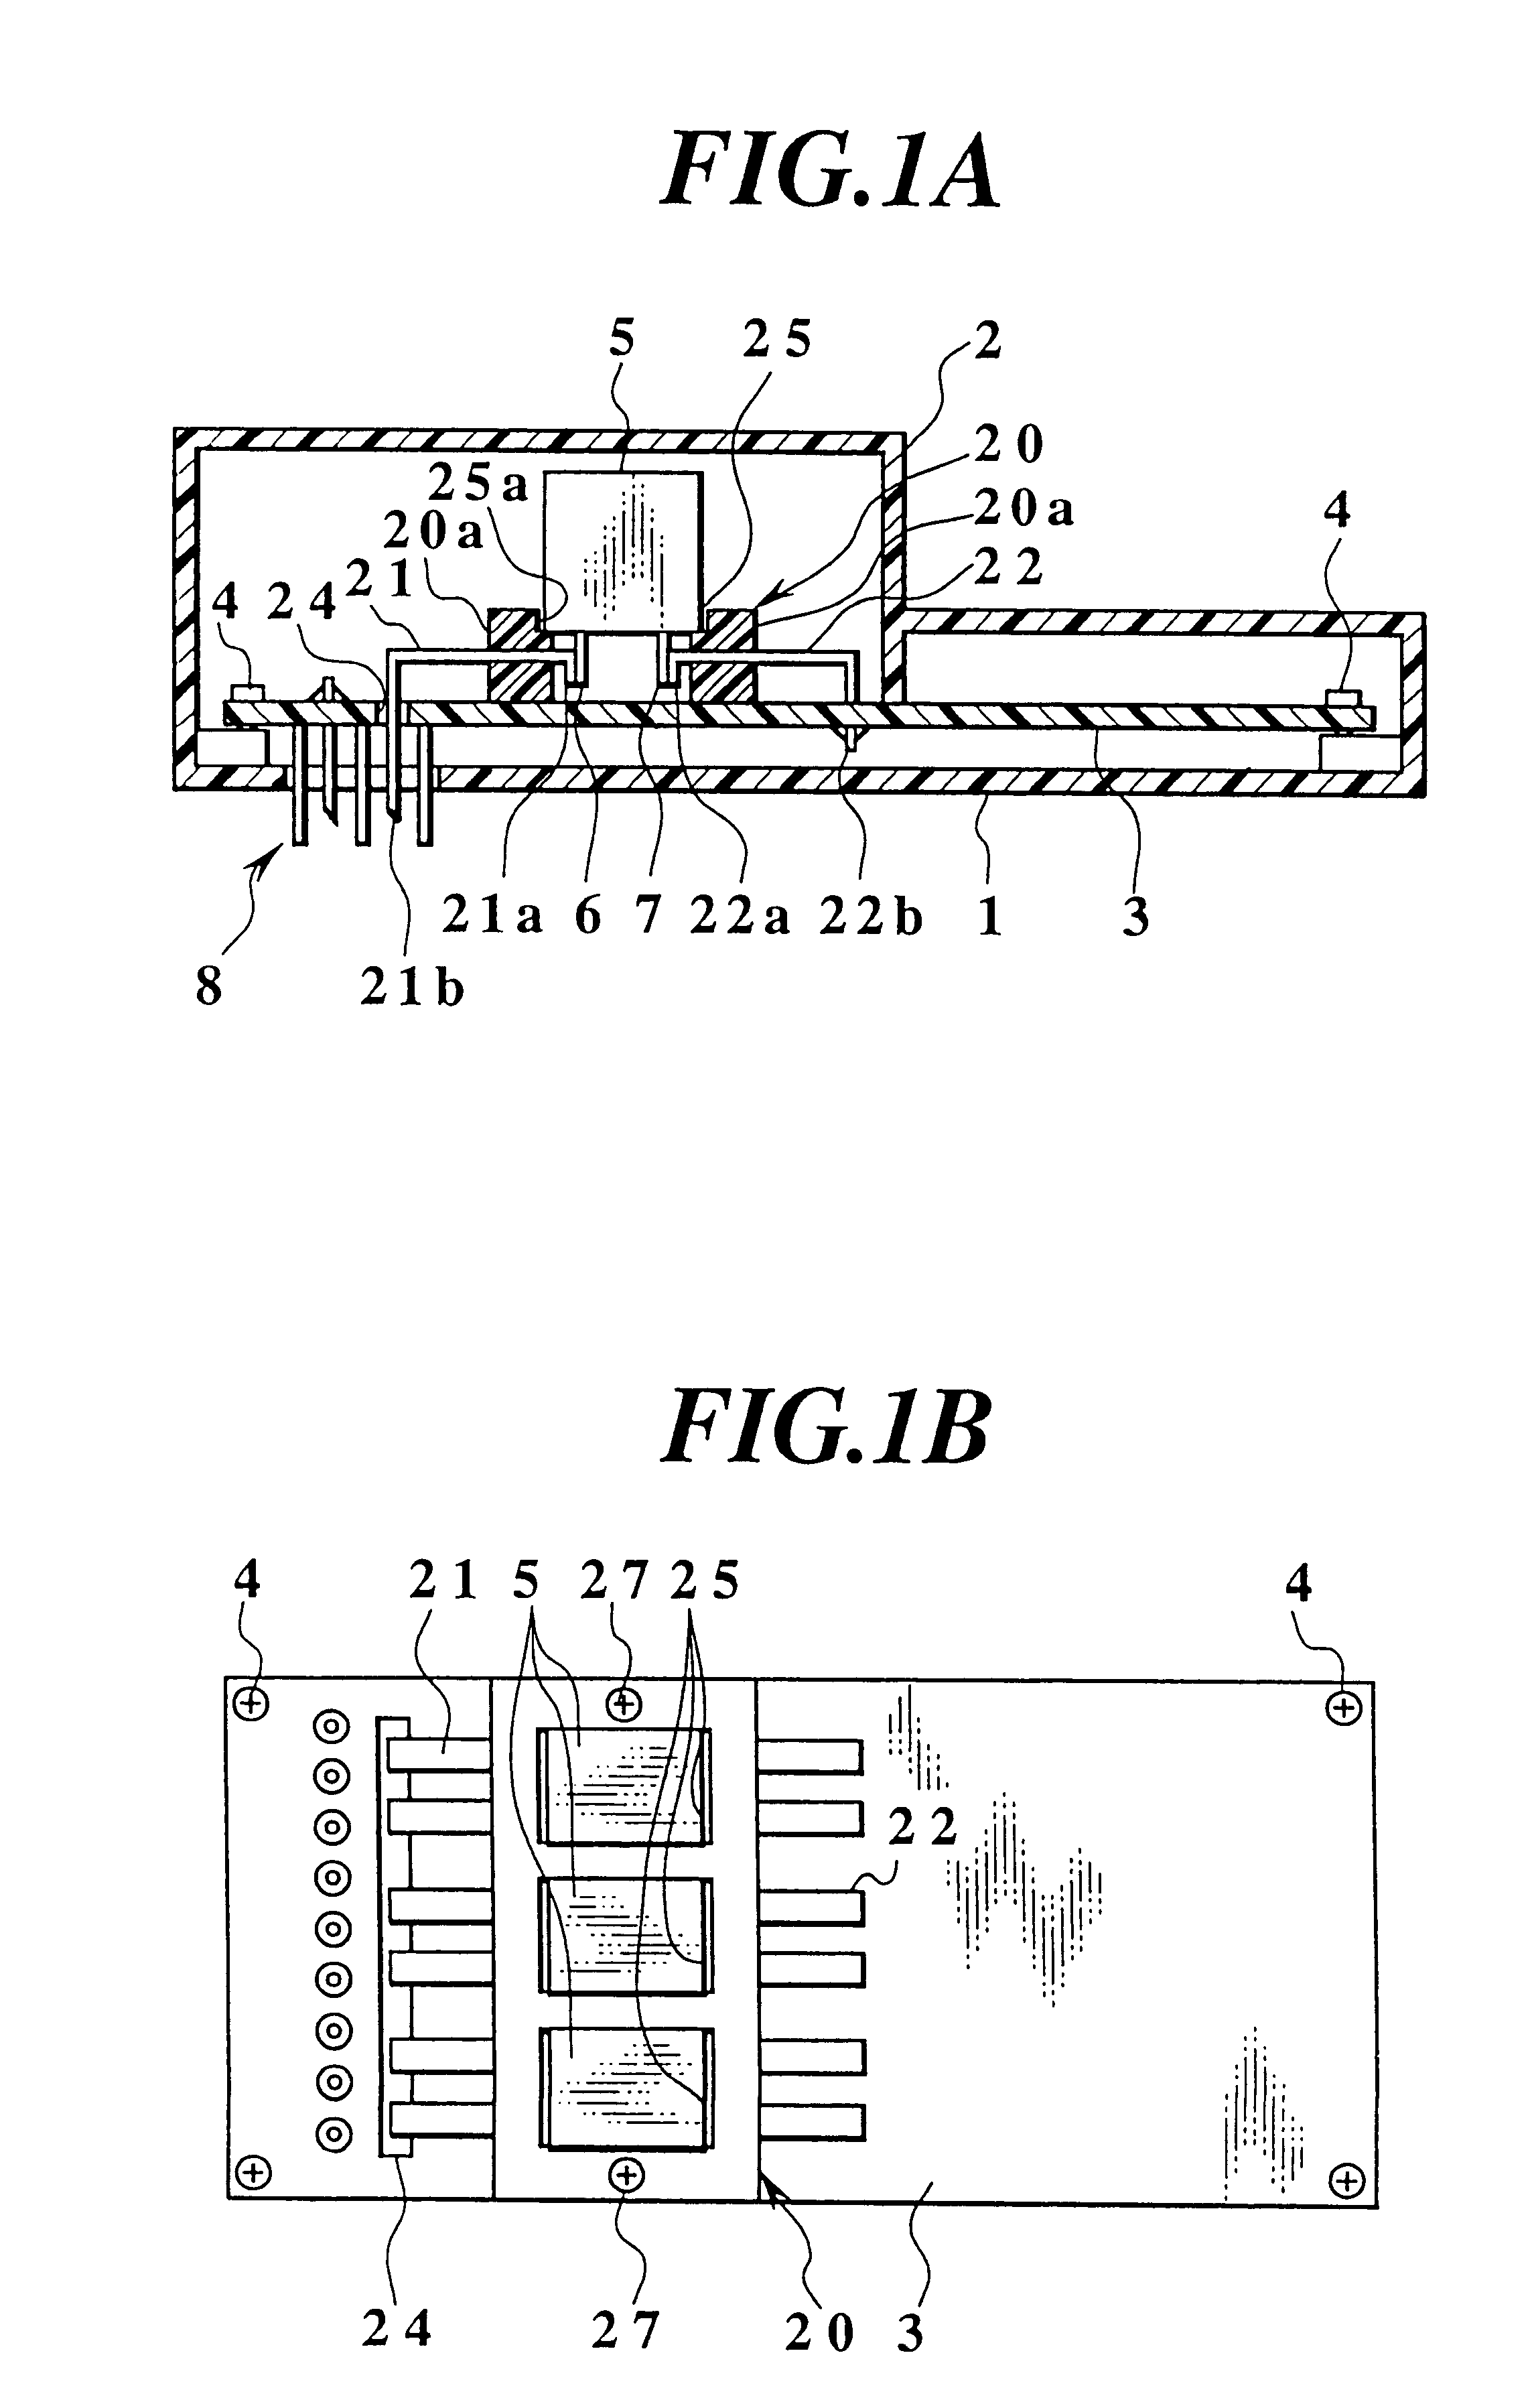 Mounting structure for a relay arranged on a printed circuit board